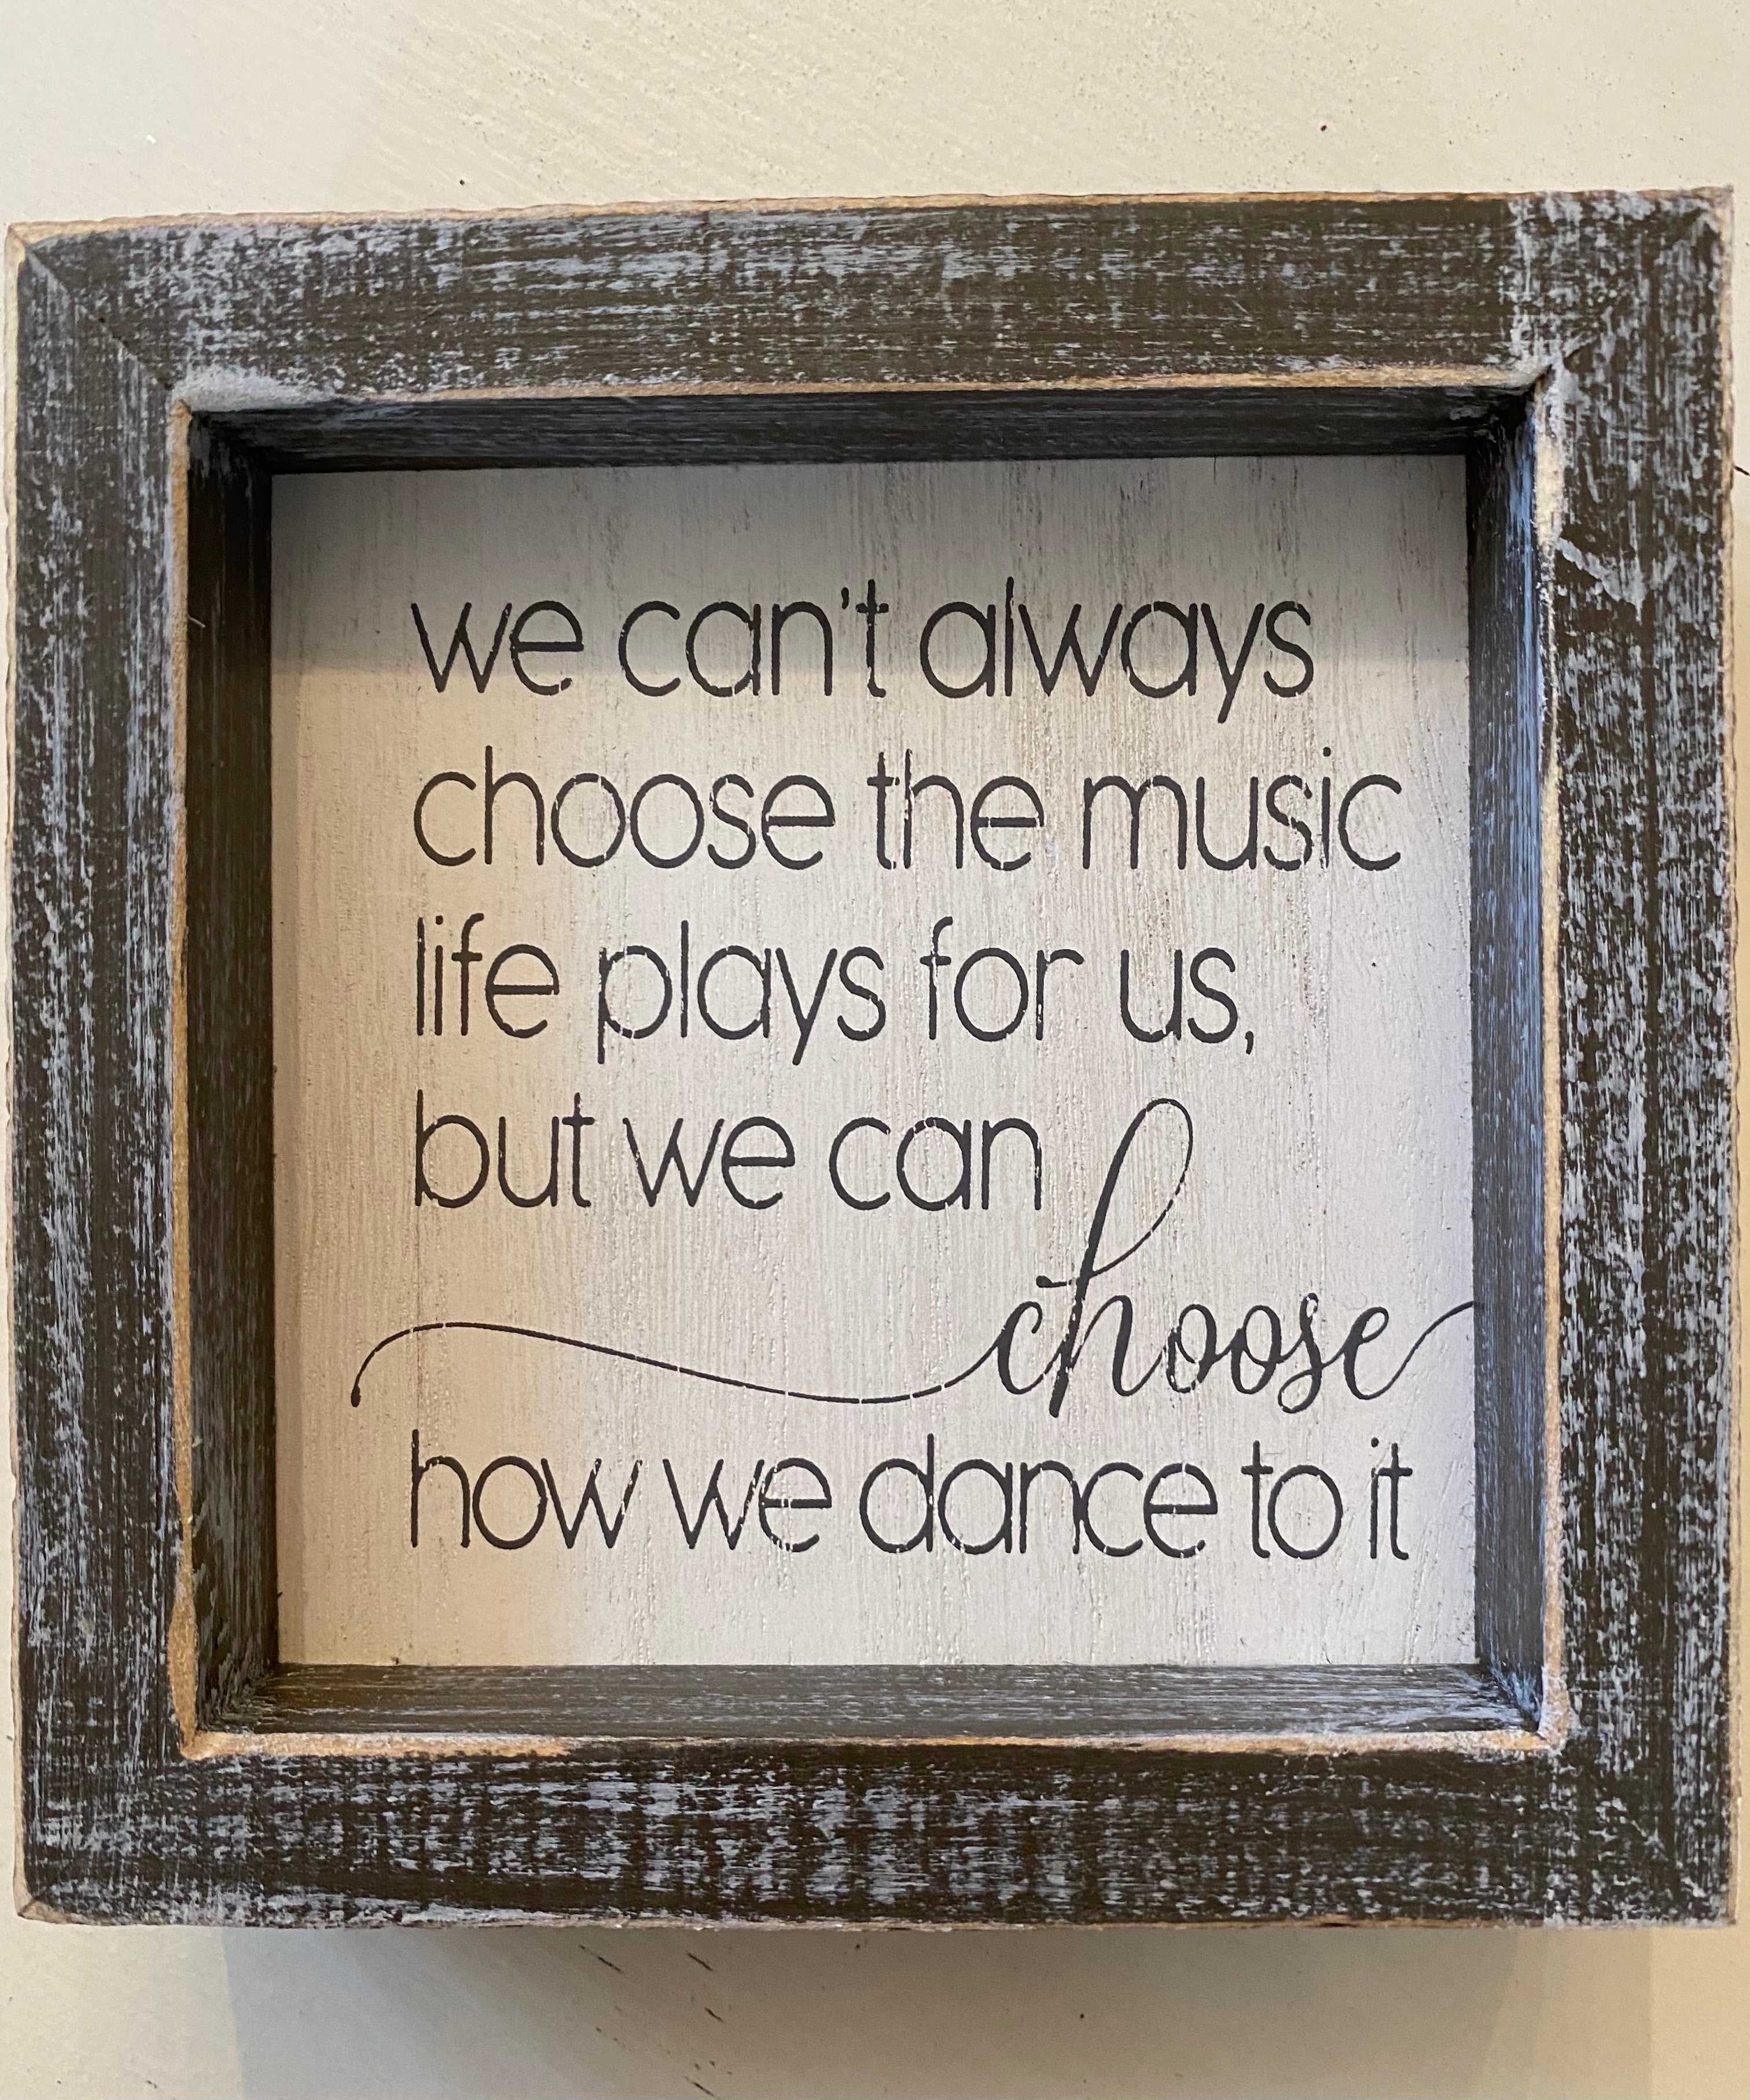 we can't always choose the music life plays for us. but we can choose how we dance to it